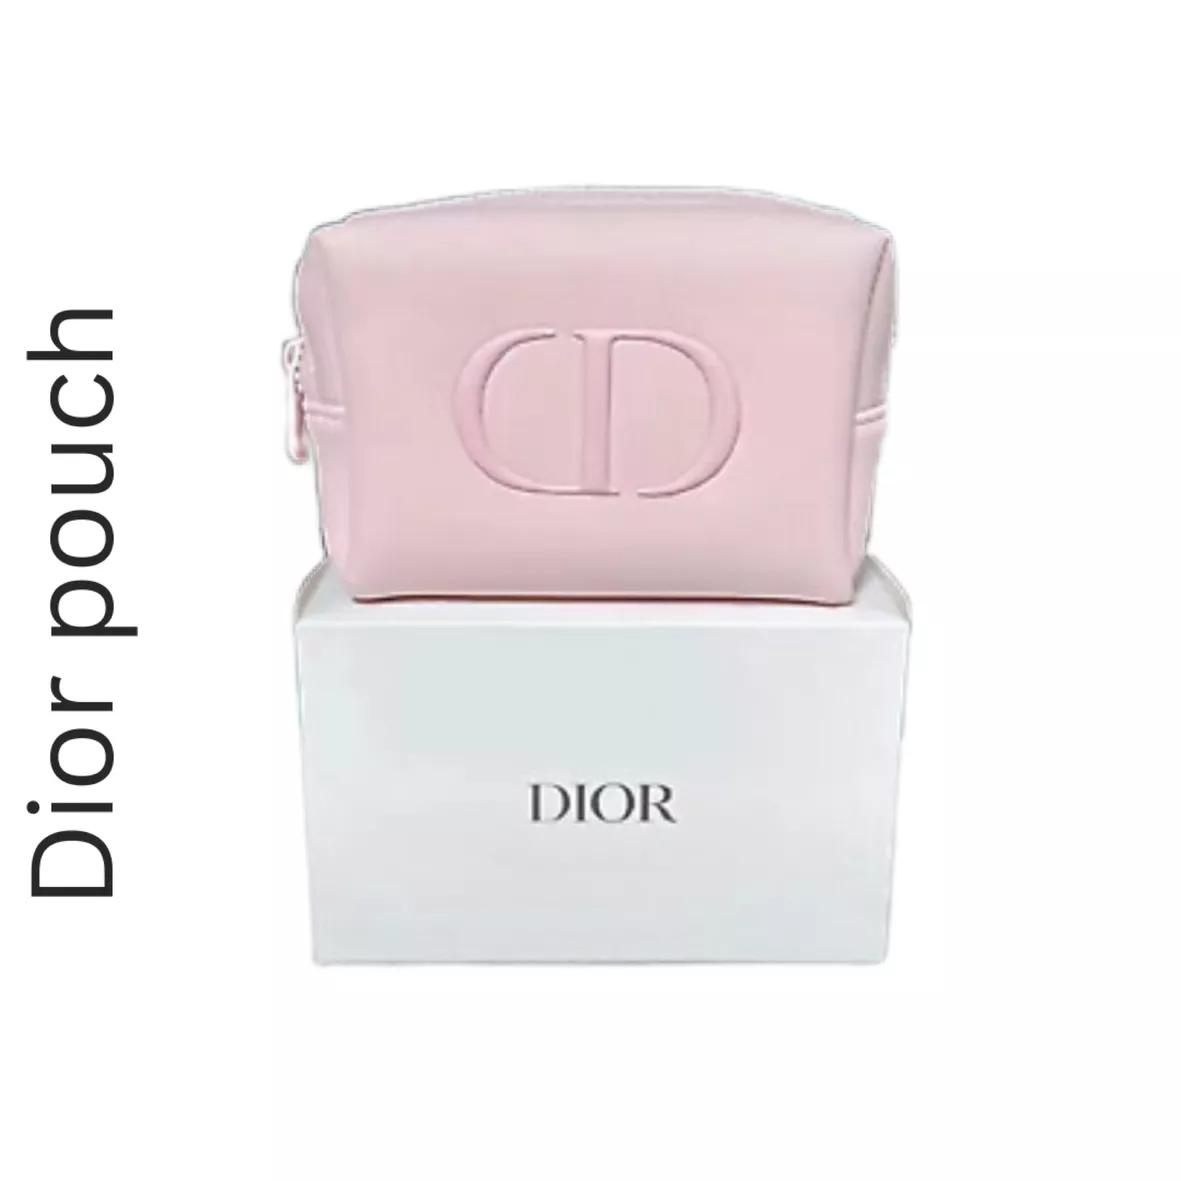 CD Dior Beauty Pink Makeup Cosmetics Bag / Pouch / Clutch / Case, Brand NEW!